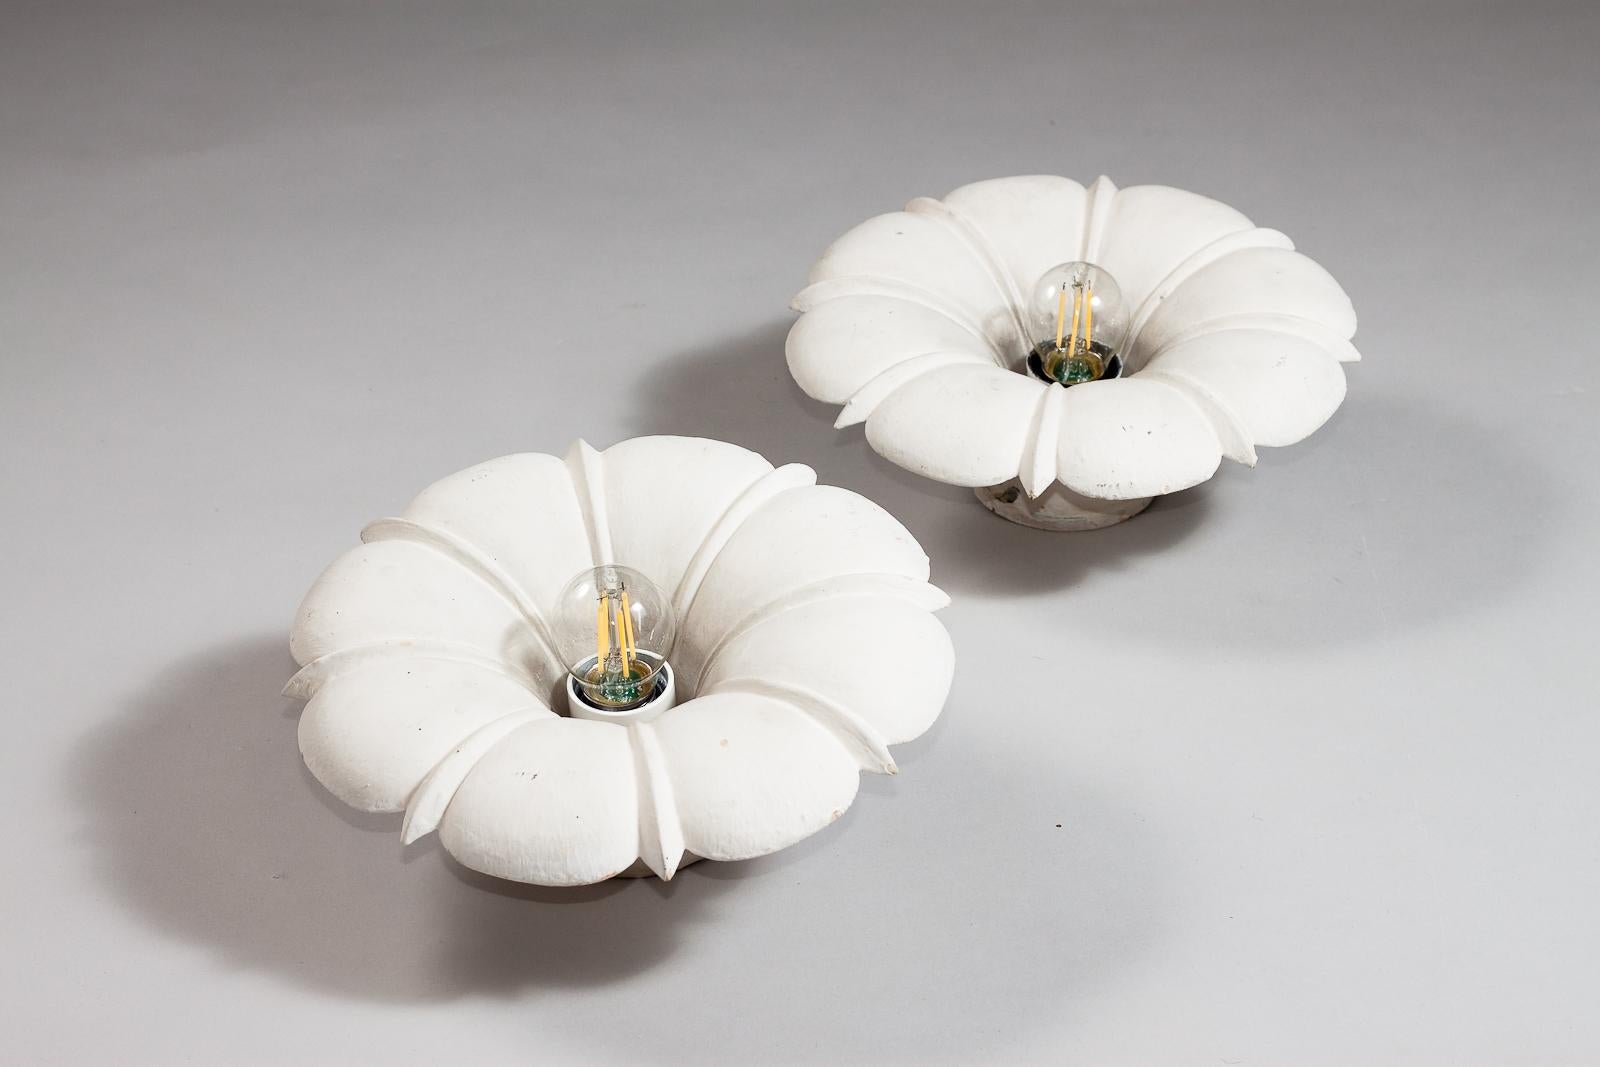 Molded Beautiful vintage metal flower plafond lamps or wall sconces